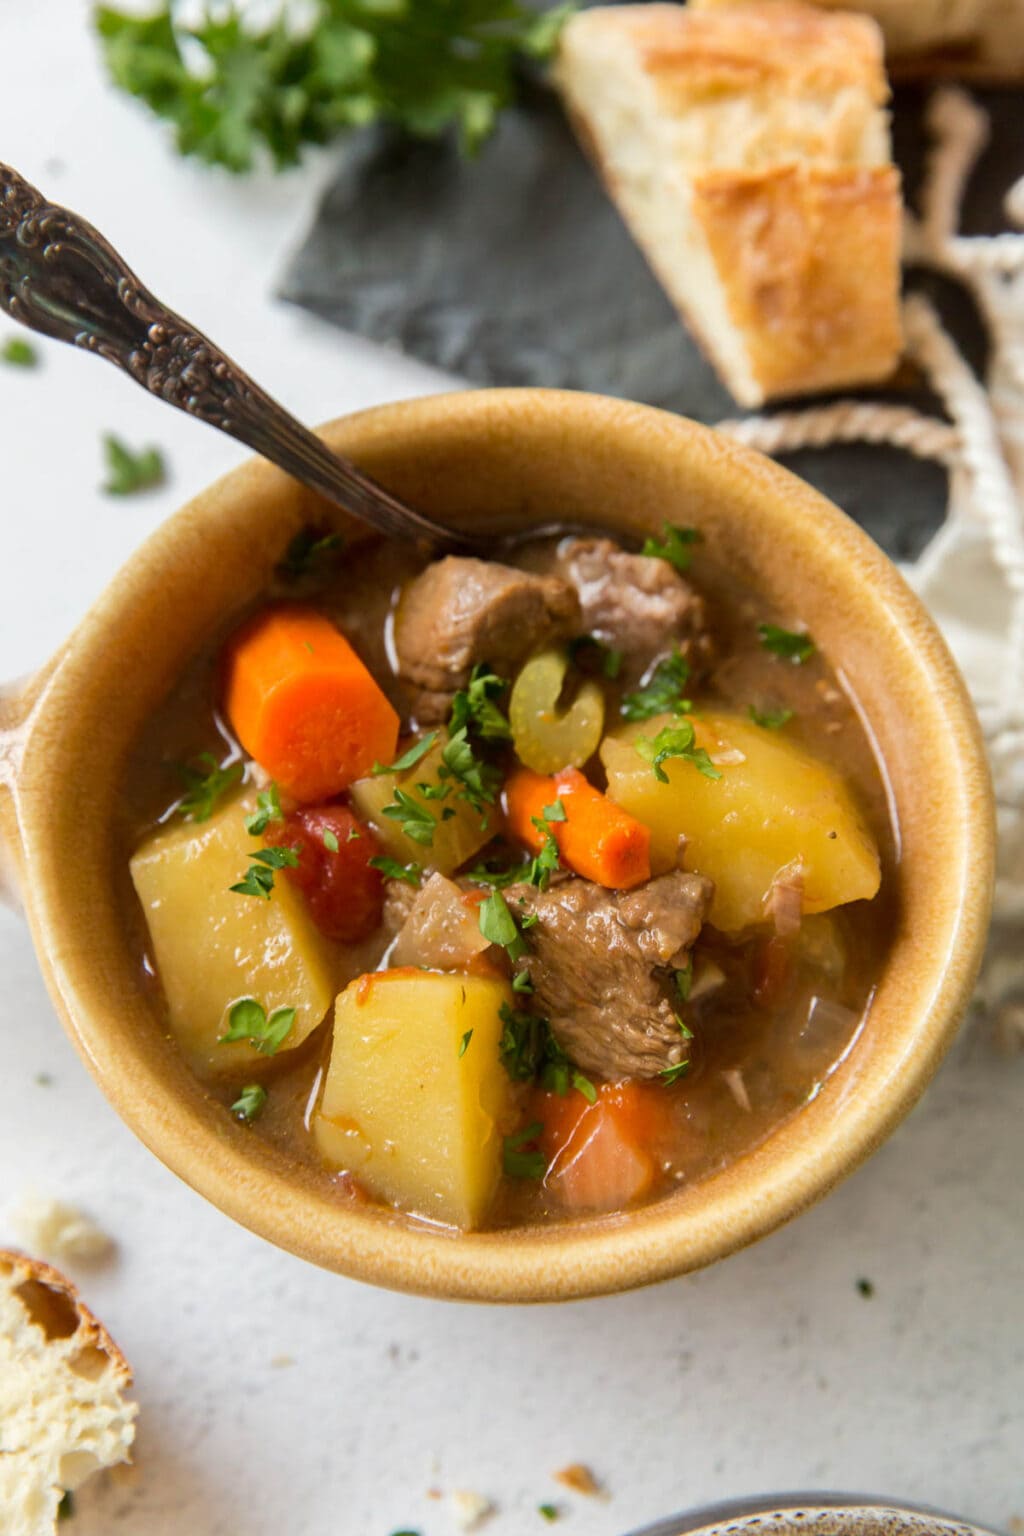 Easy Beef Stew Recipe (Stovetop or Slow Cooker) | YellowBlissRoad.com